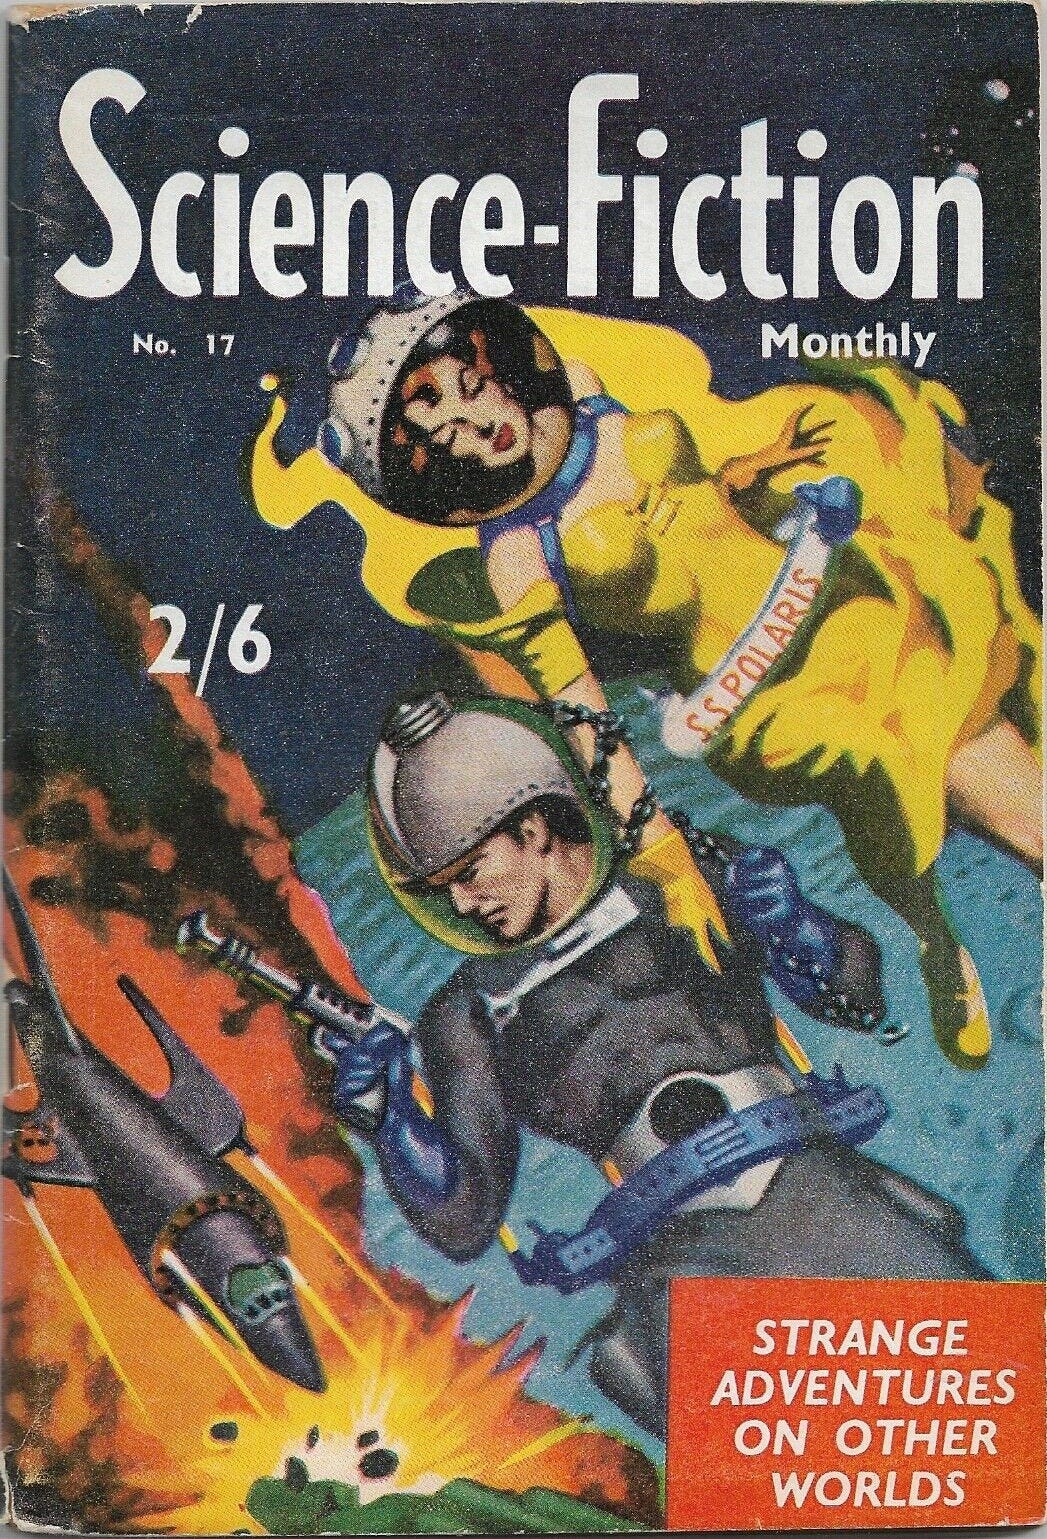 Science-Fiction Monthly #17 -- Pulp Covers